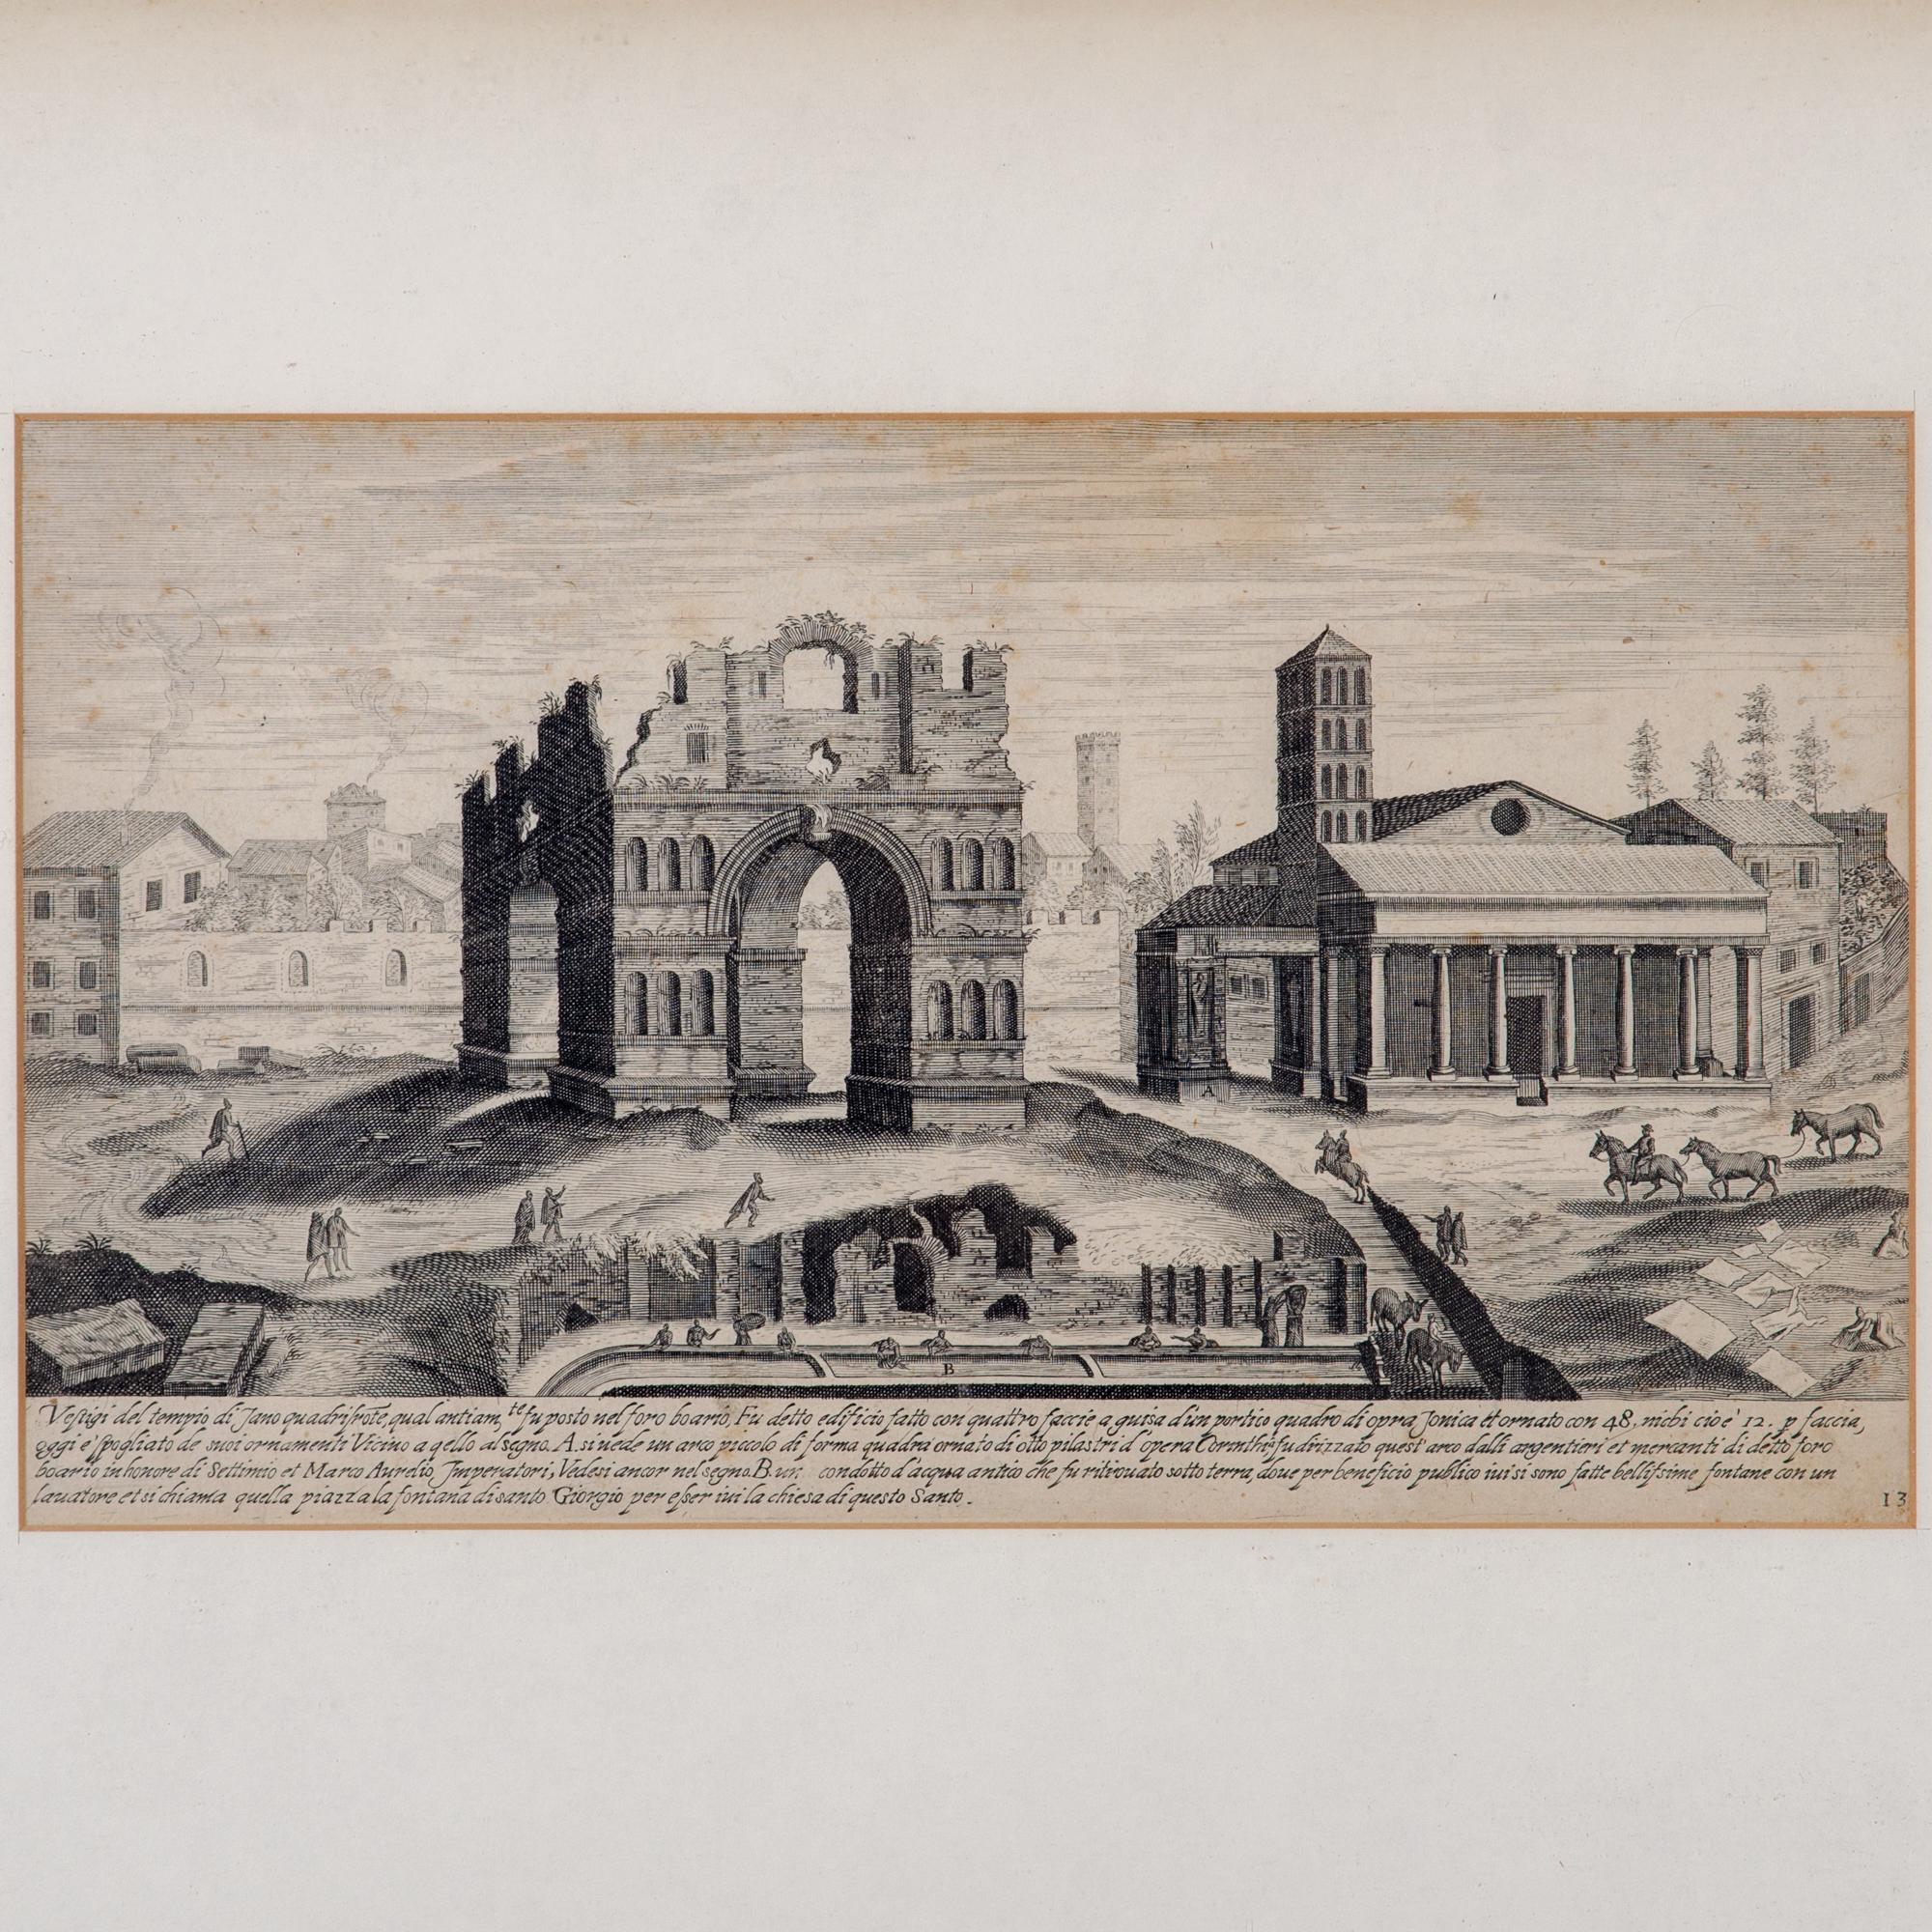 Classical Roman Étienne Dupérac Etchings of Ancient Roman Ruins, 17th Century - A Pair For Sale